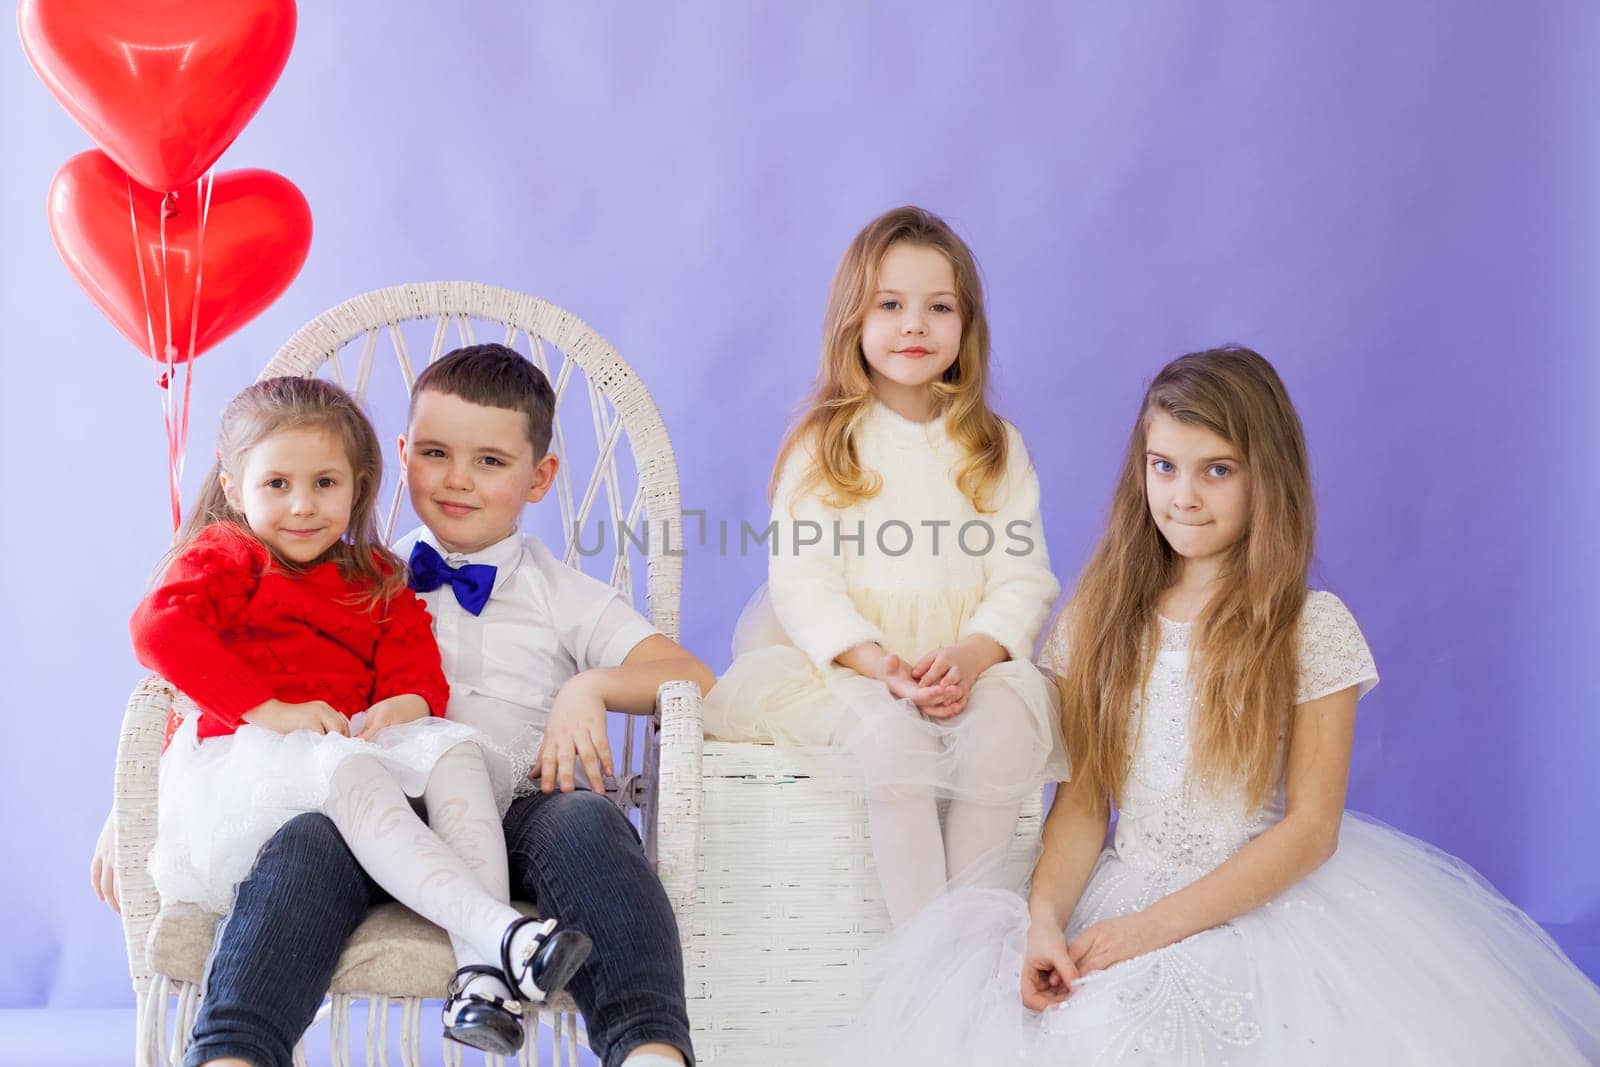 Boy and girls with red heart-shaped balloons on birthday